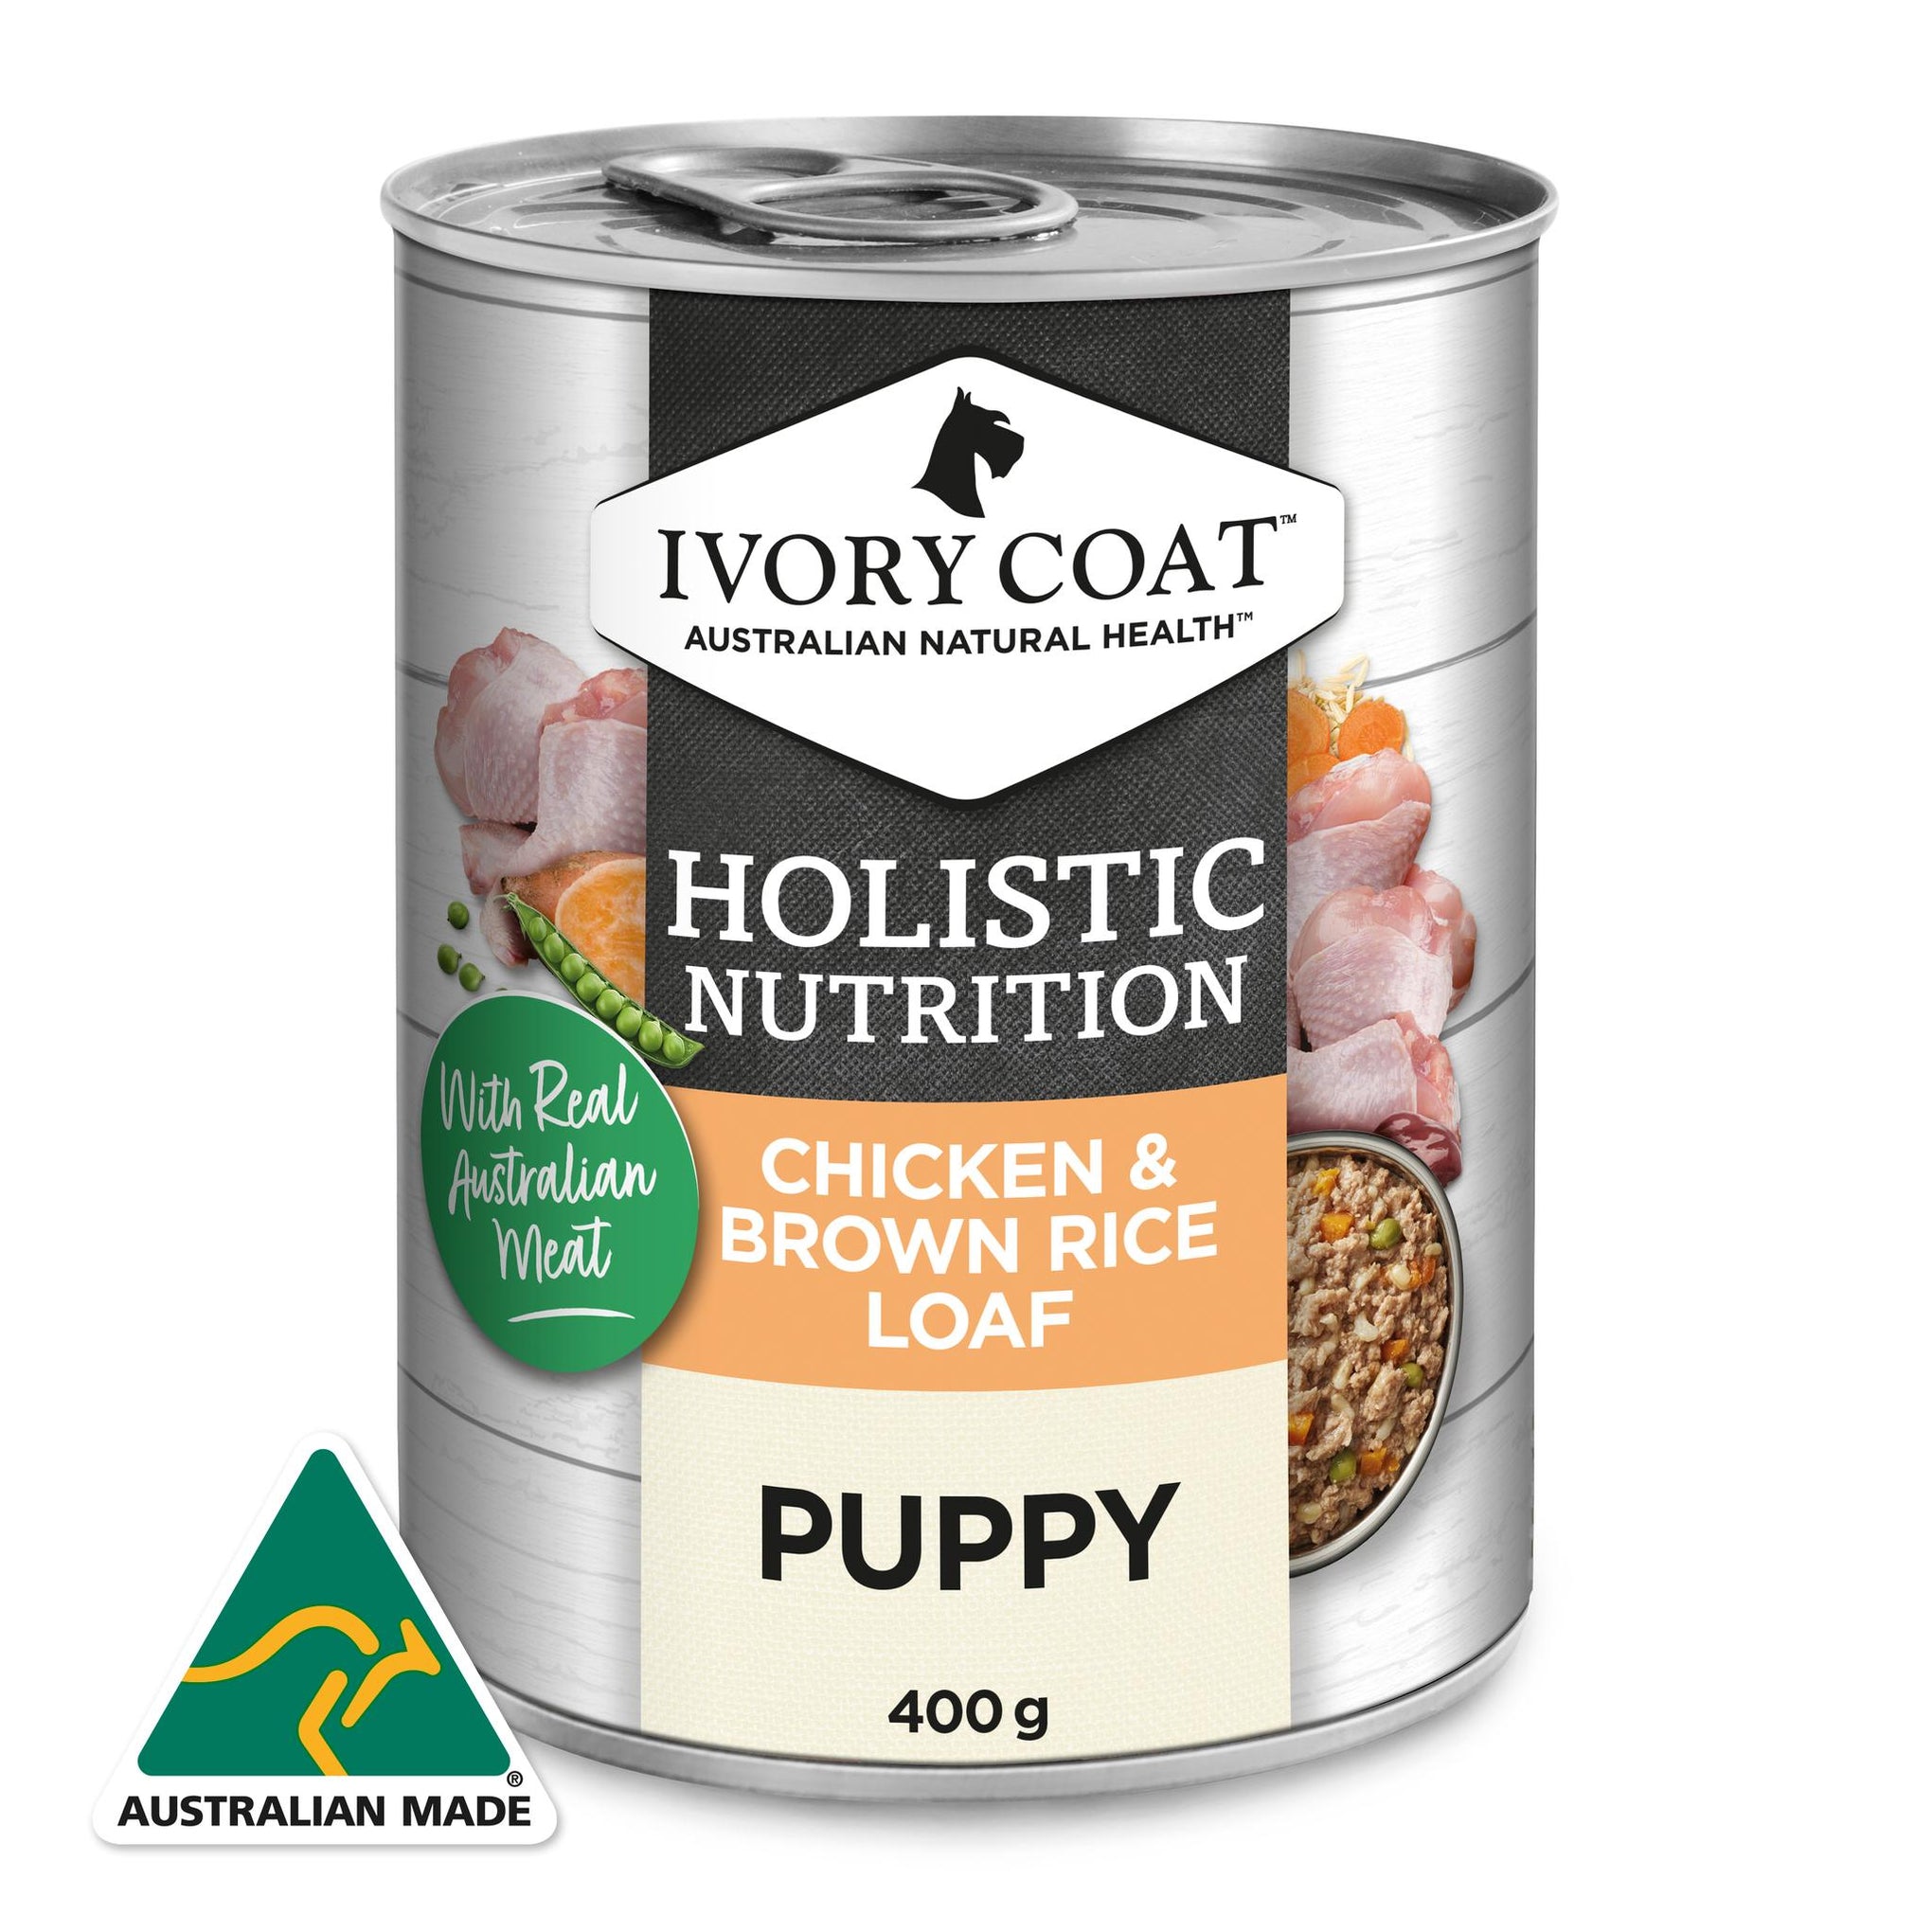 Ivory Coat Holistic Nutrition Puppy Chicken & Brown Rice Loaf Dog Wet